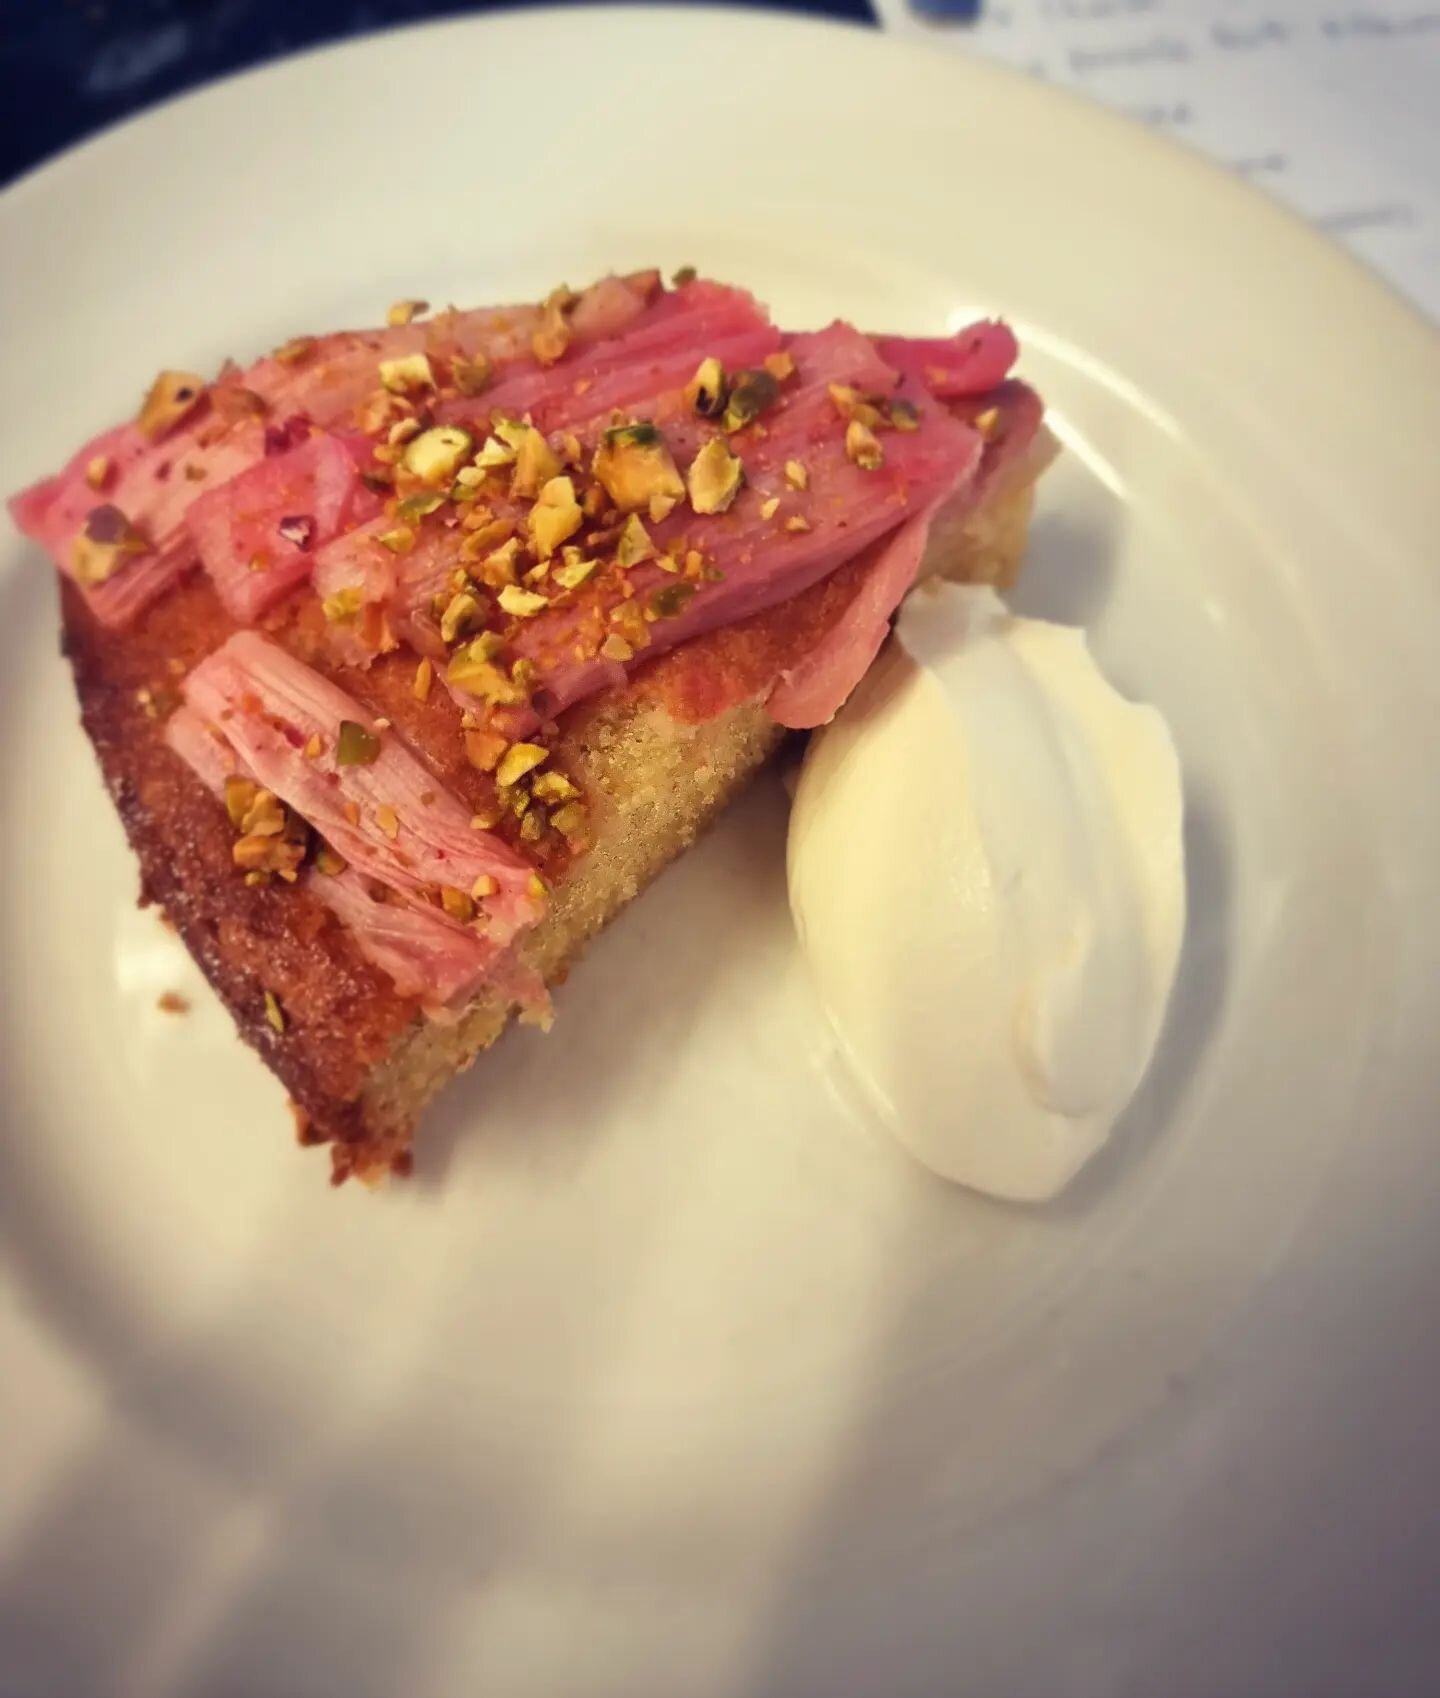 R H U B A R B ! 
This Rhubarb &amp; Orange cake went down very well at yesterday's lunch. With Pistachios and Creme Fraiche, simple but effective 👌 
.
.
.
#rhubarbseason #cooktheseasons #localproduce #sundaylunch #kent #whitstable #sundayroastwhitst